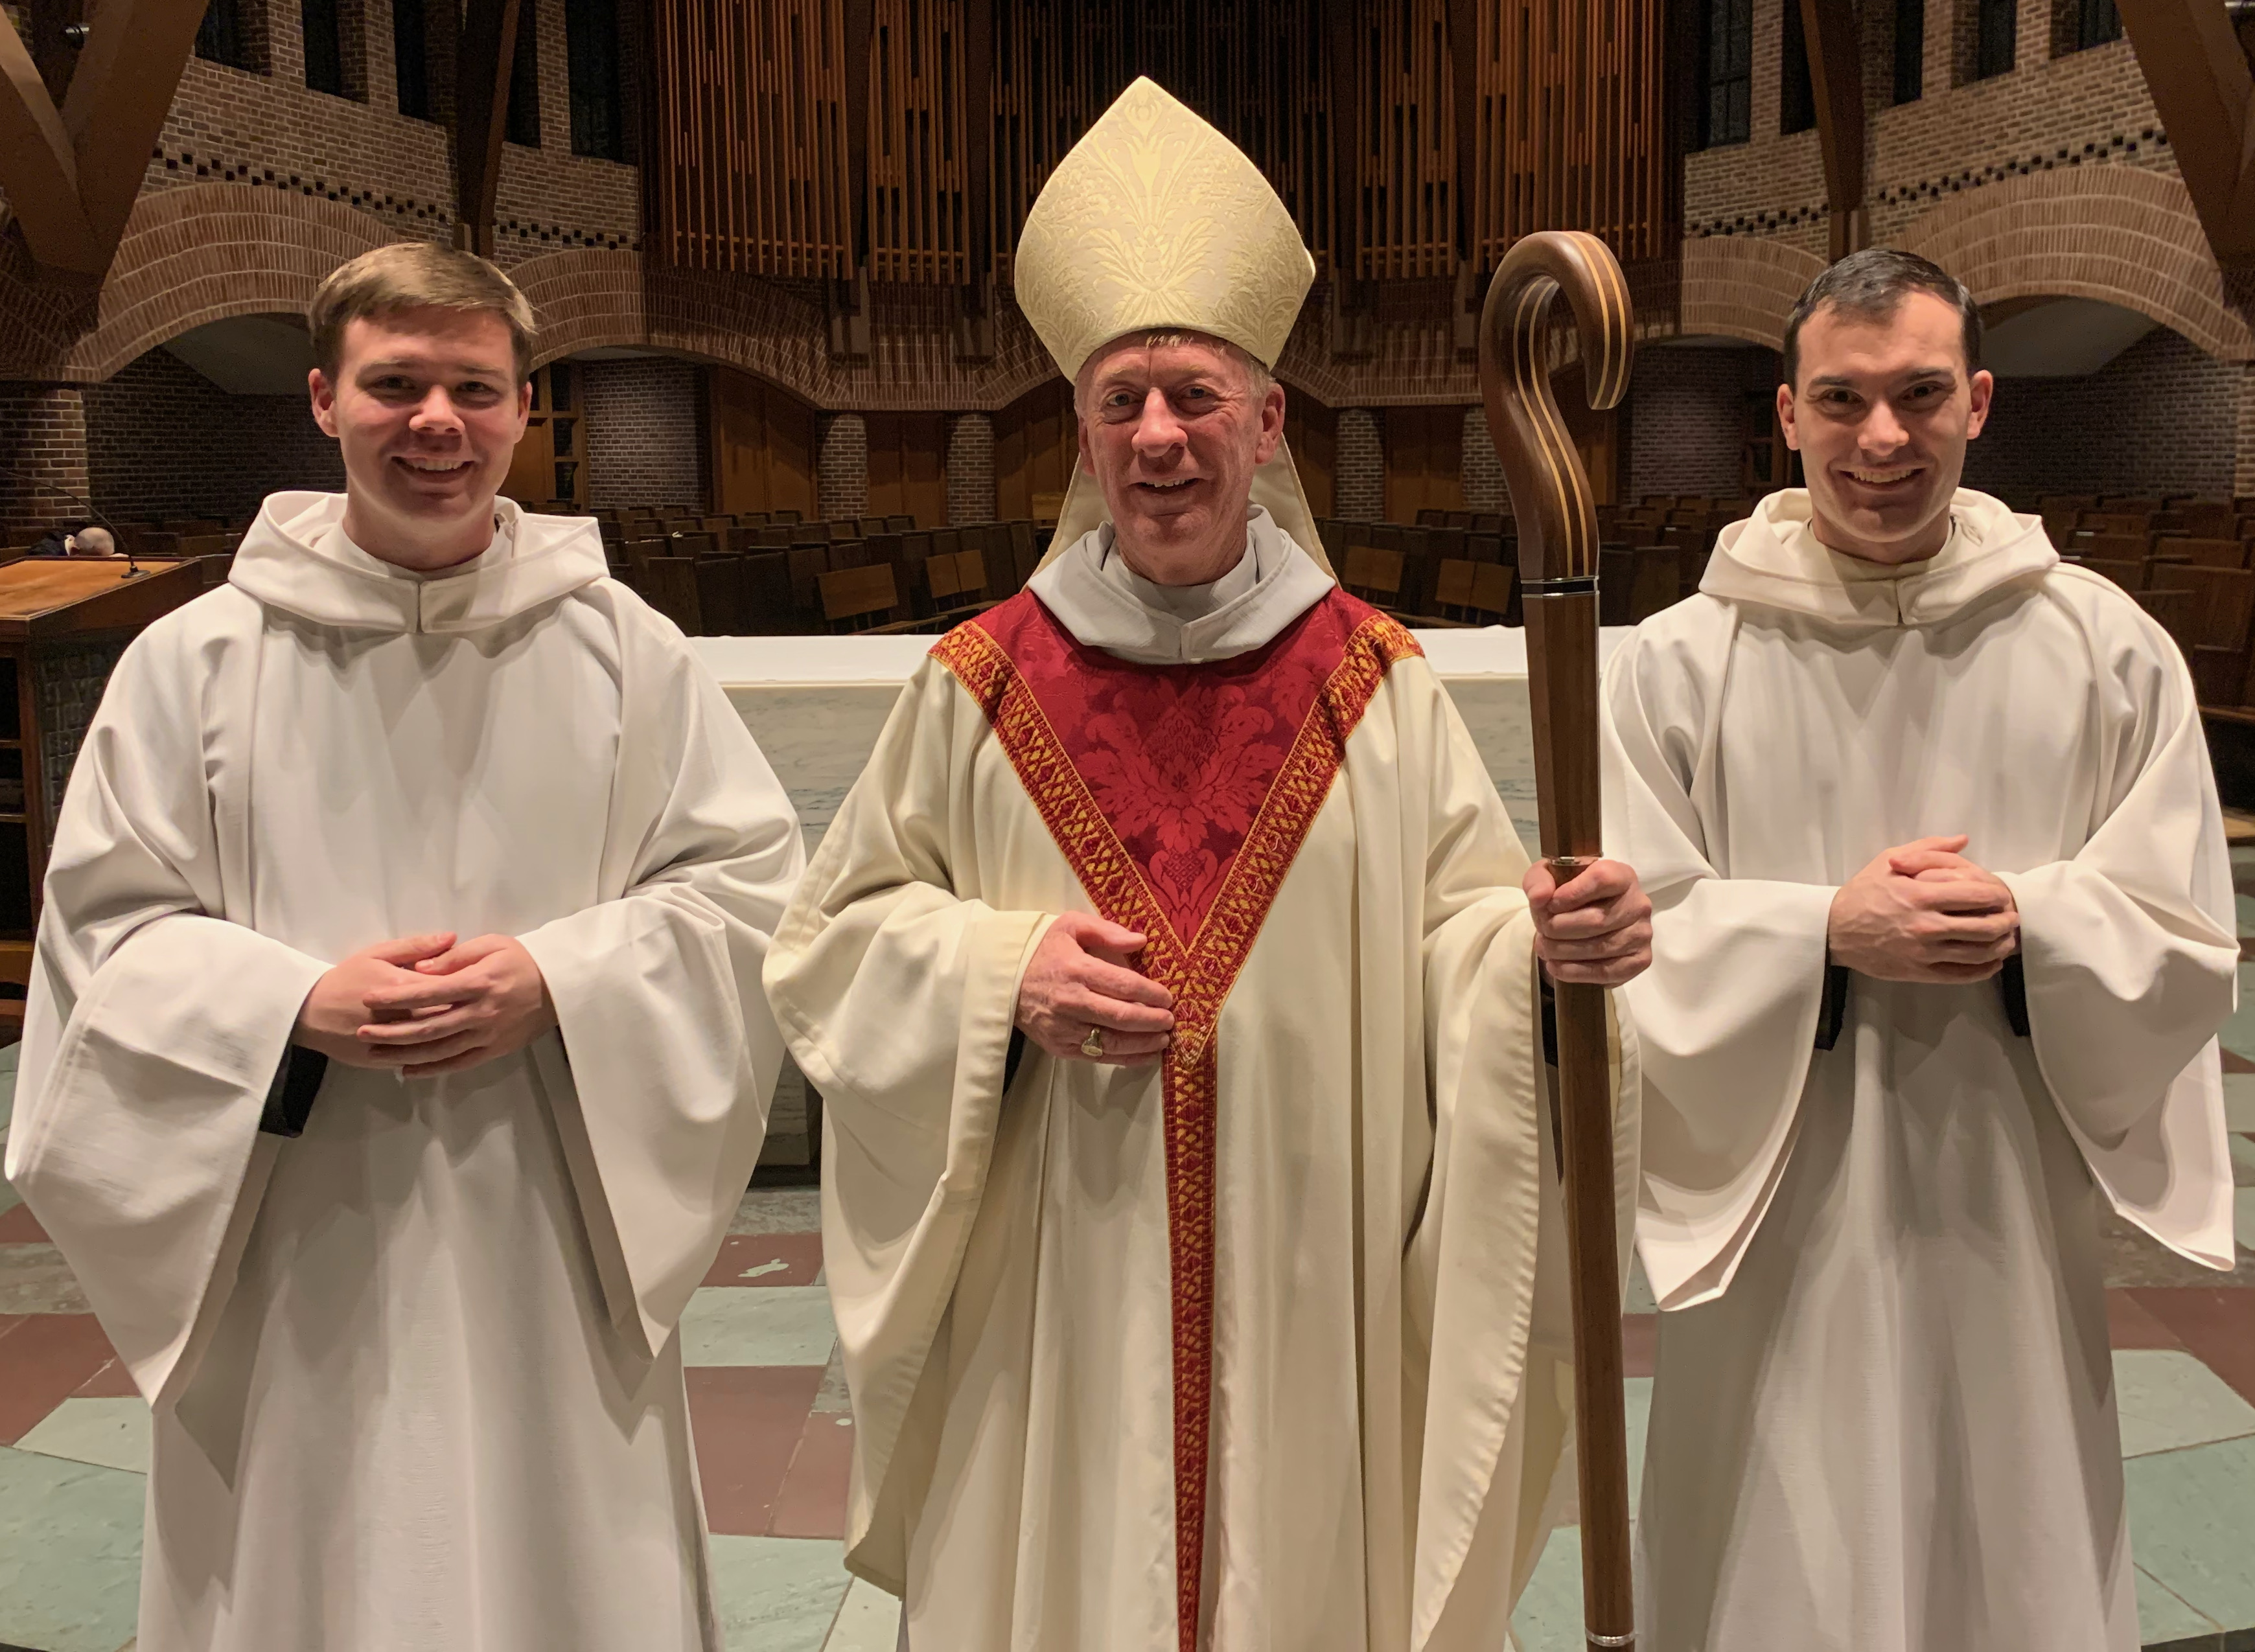 Brother Titus, Abbot Mark, and Brother Basil